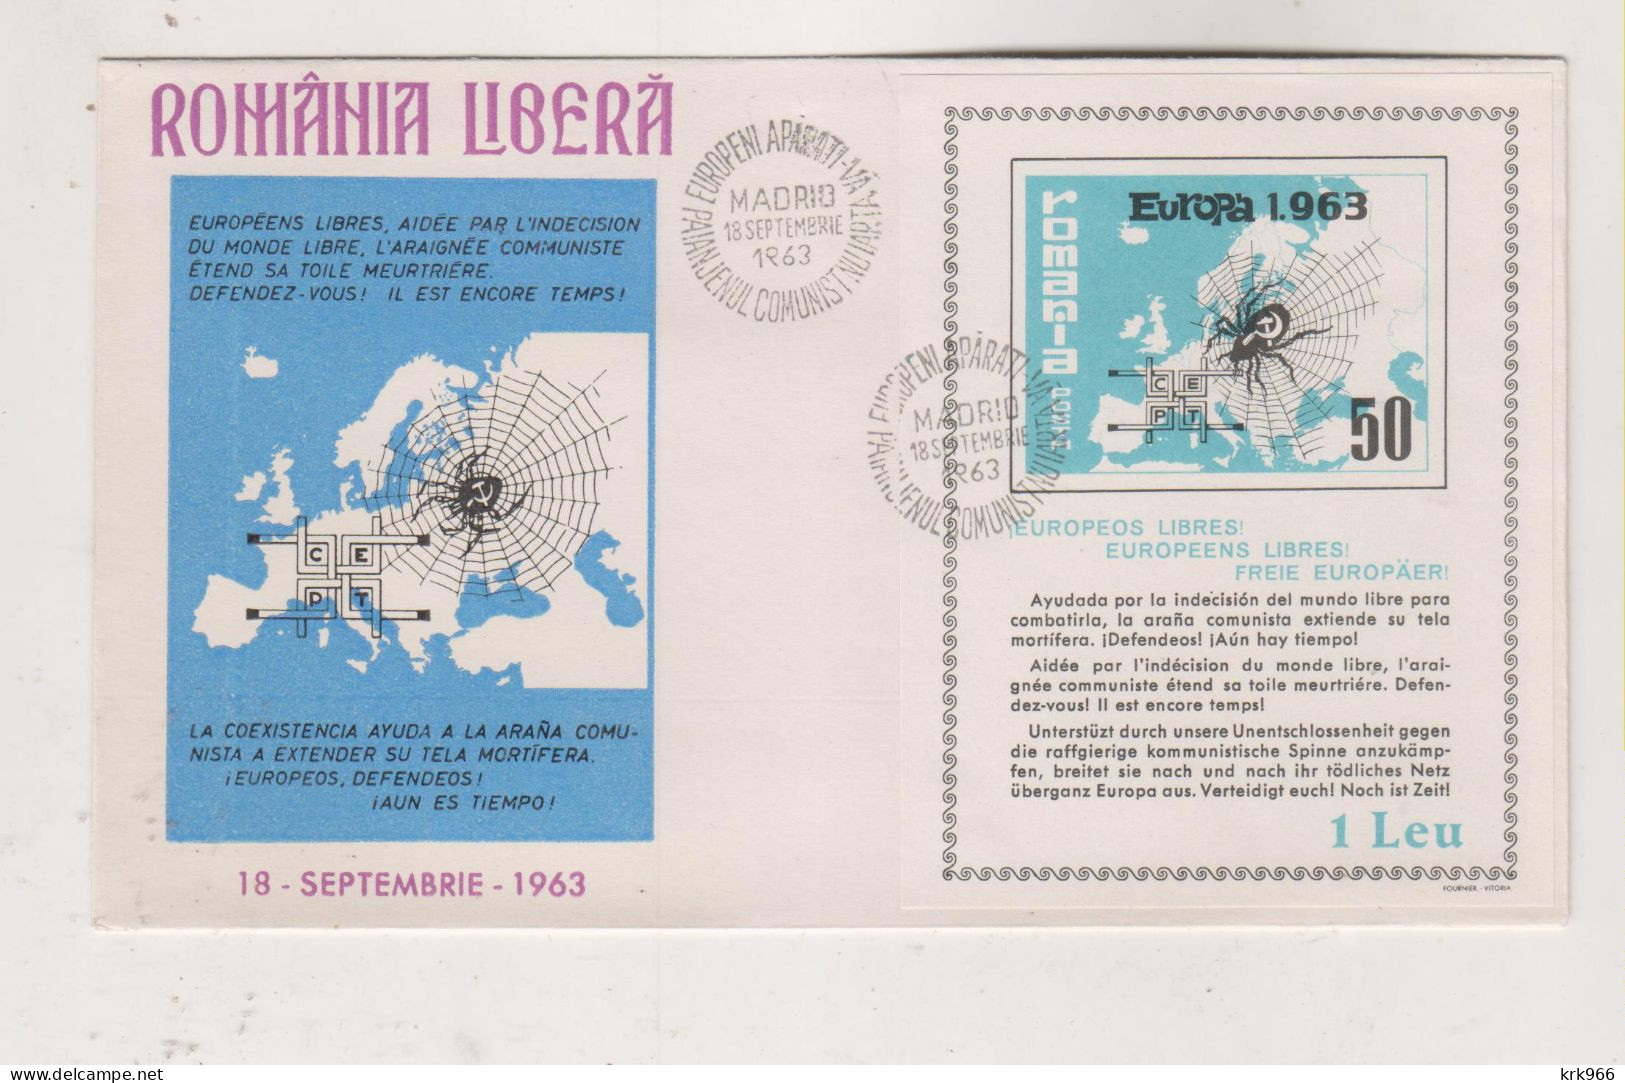 ROMANIA  1962  EXILE   Cover - Covers & Documents